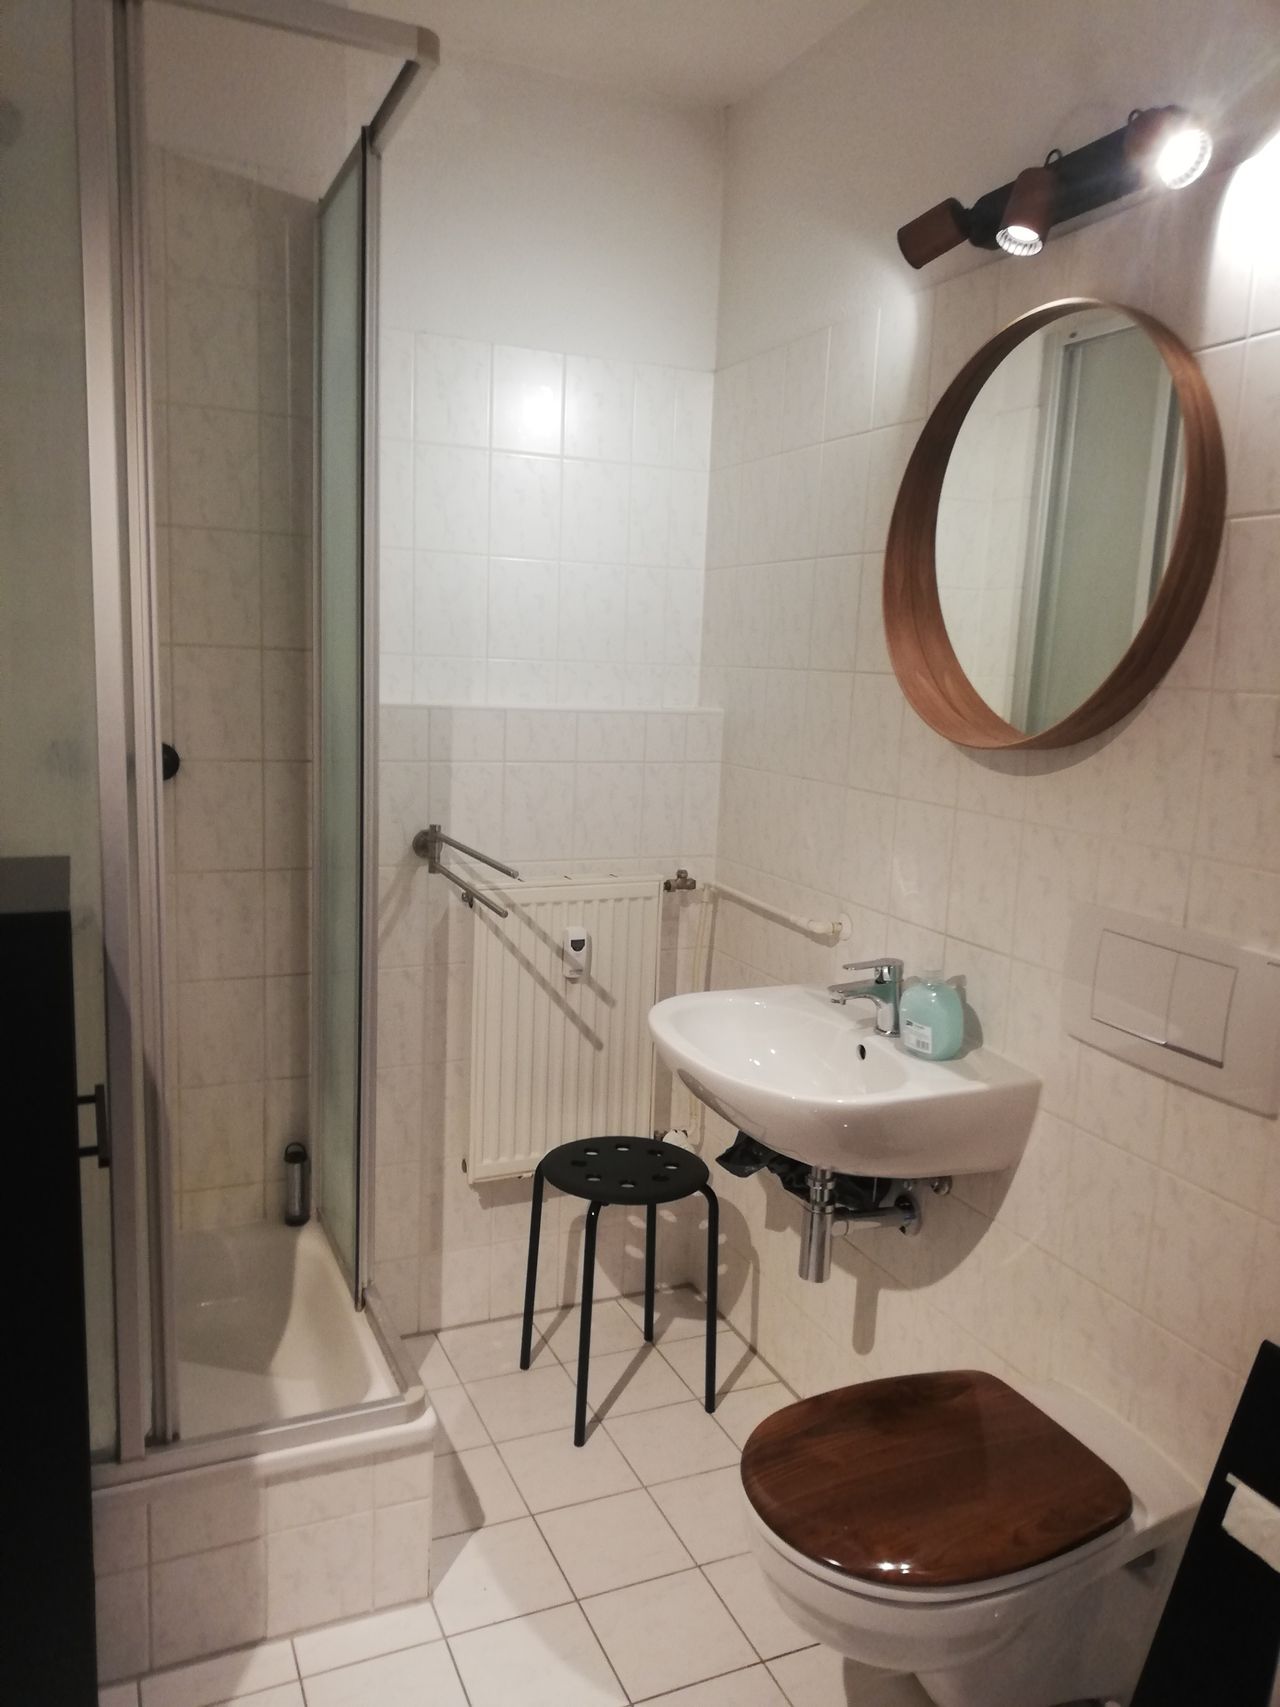 Fully furnished 1.5 room apartment right next to the Köpenick clinic